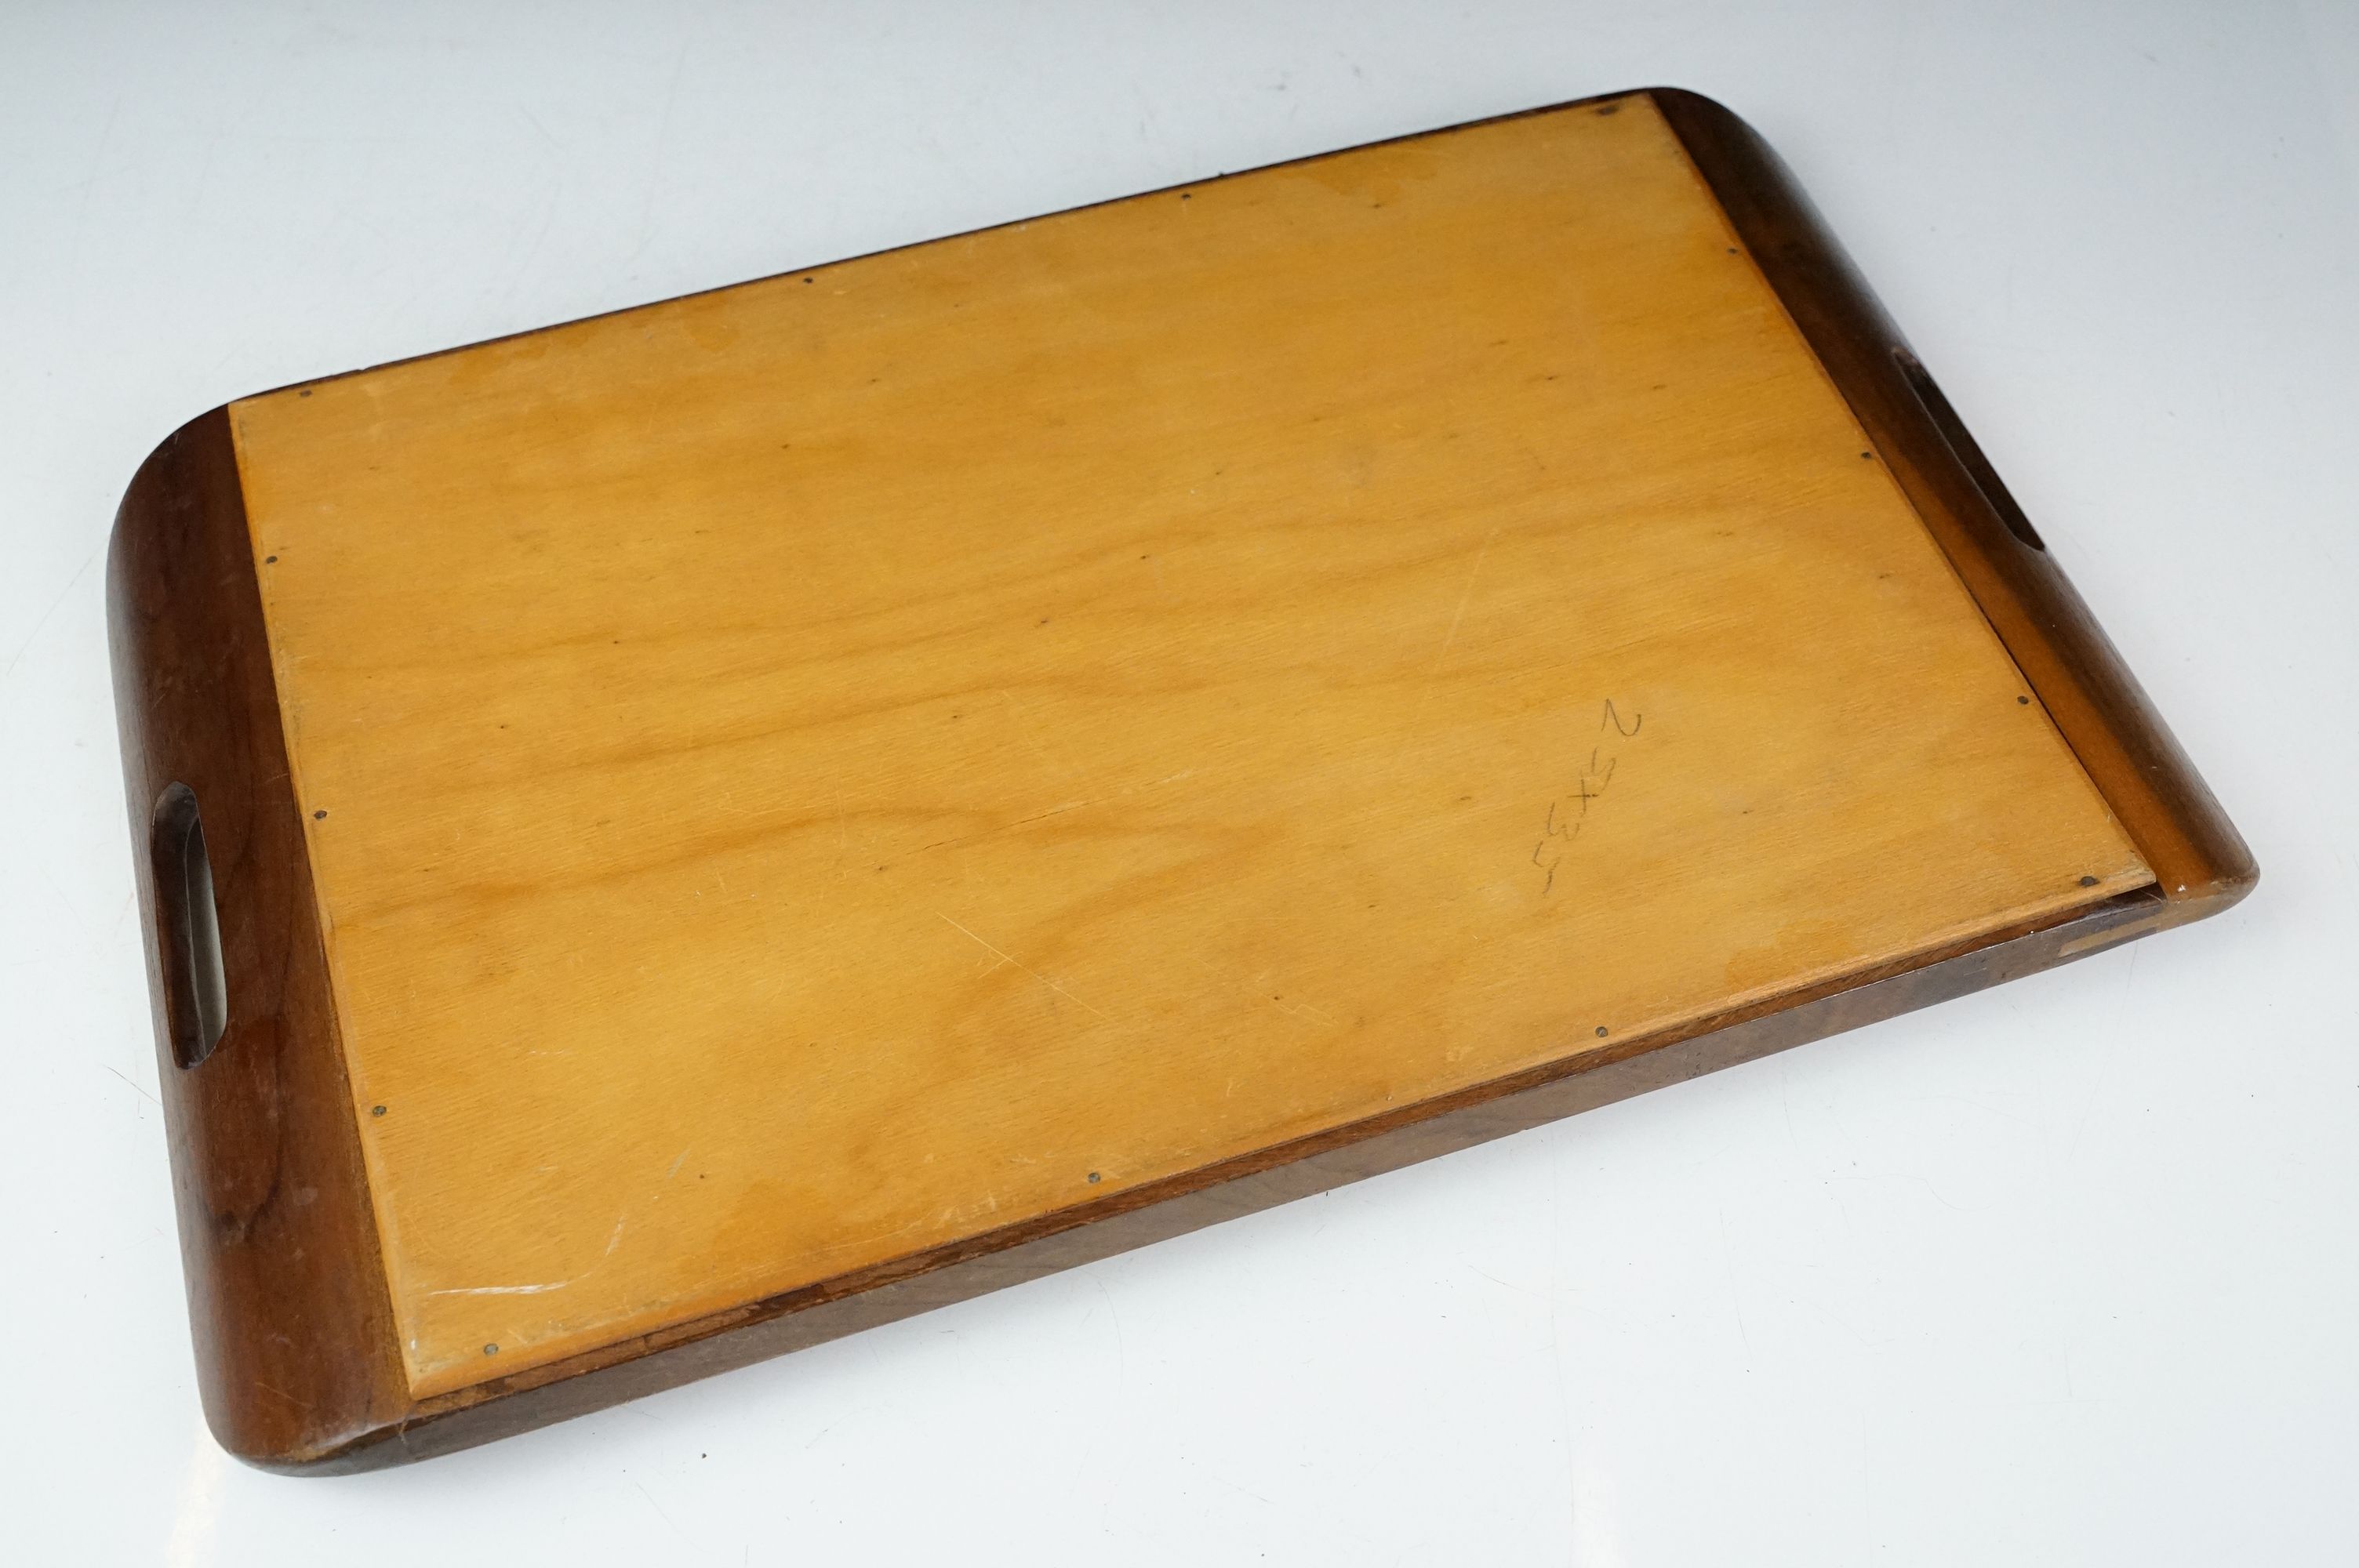 Early 20th century inlaid wooden tray with butterfly specimens and masonic butterfly wing emblem - Image 11 of 11